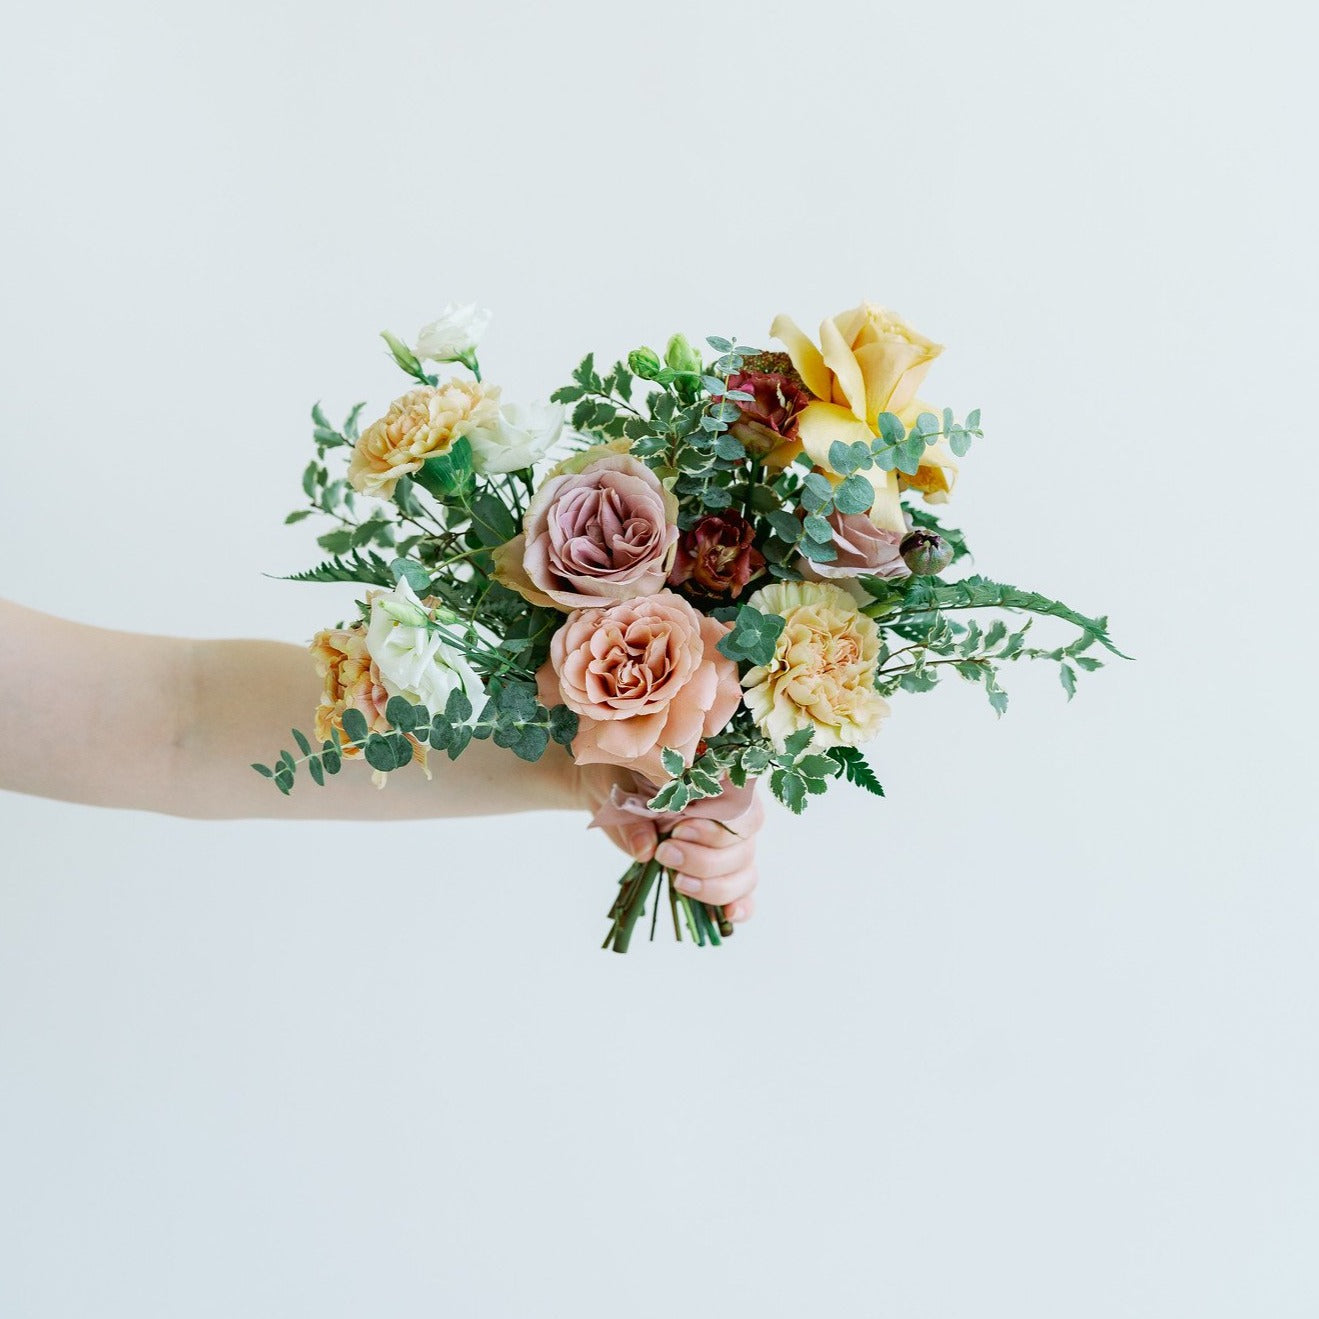 Mustard, Peach, and Mauve Bridal Bouquet Flowers for DIY Wedding